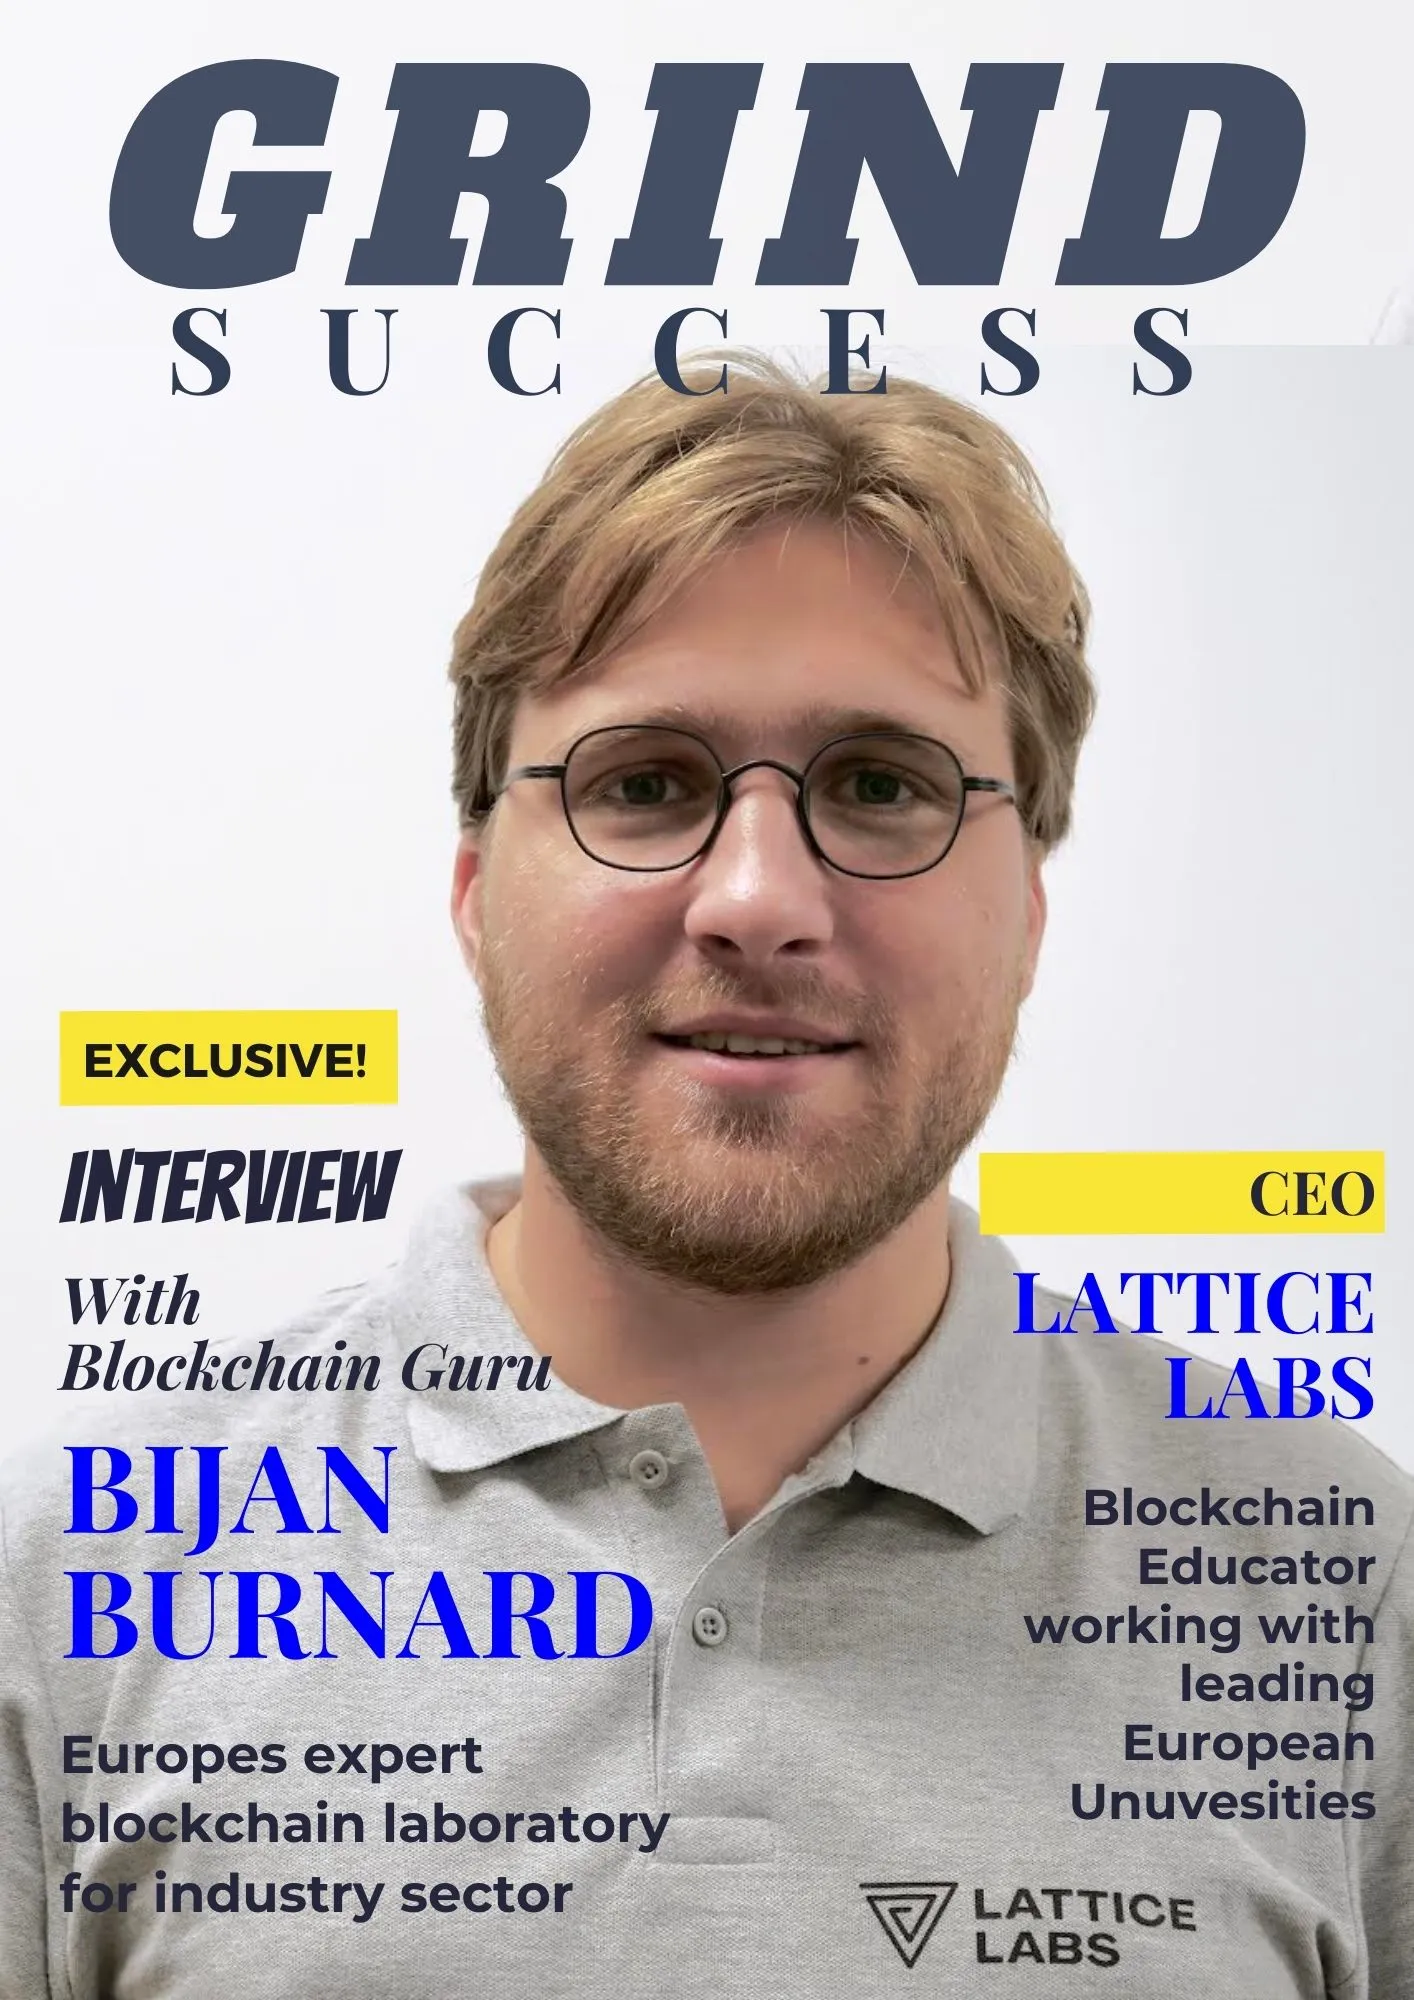 Meet Bijan Burnard, the CEO of Lattice Labs, Europe’s Leading and Most Expansive Blockchain Laboratory